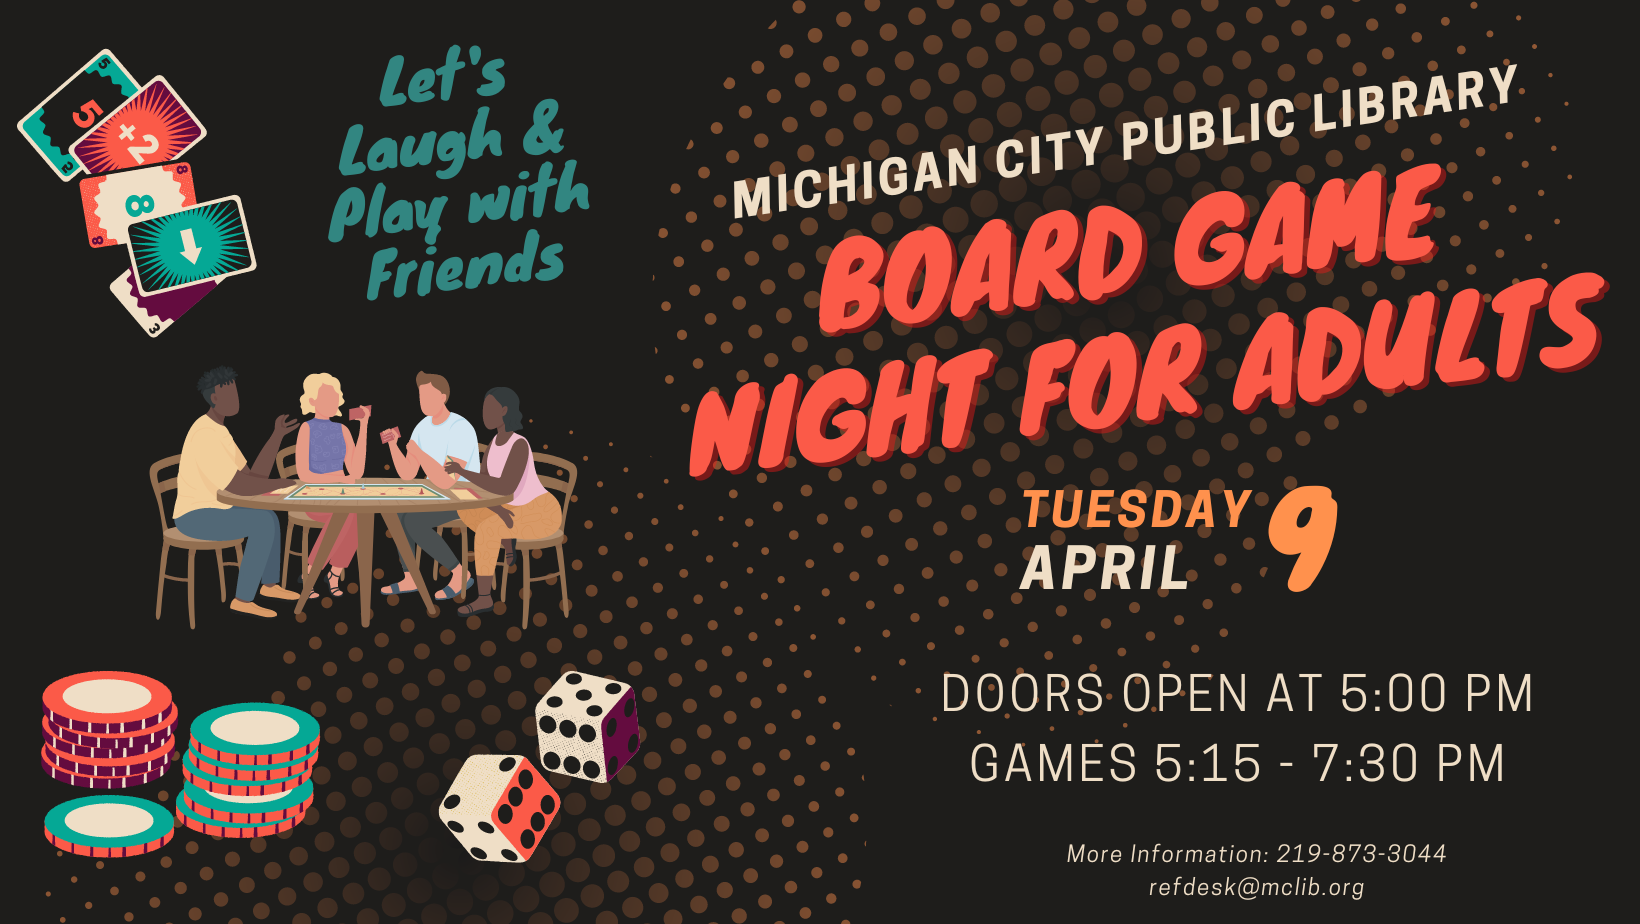 Board Game Night for Adults, Tuesday, April 9 beginning at 5 pm